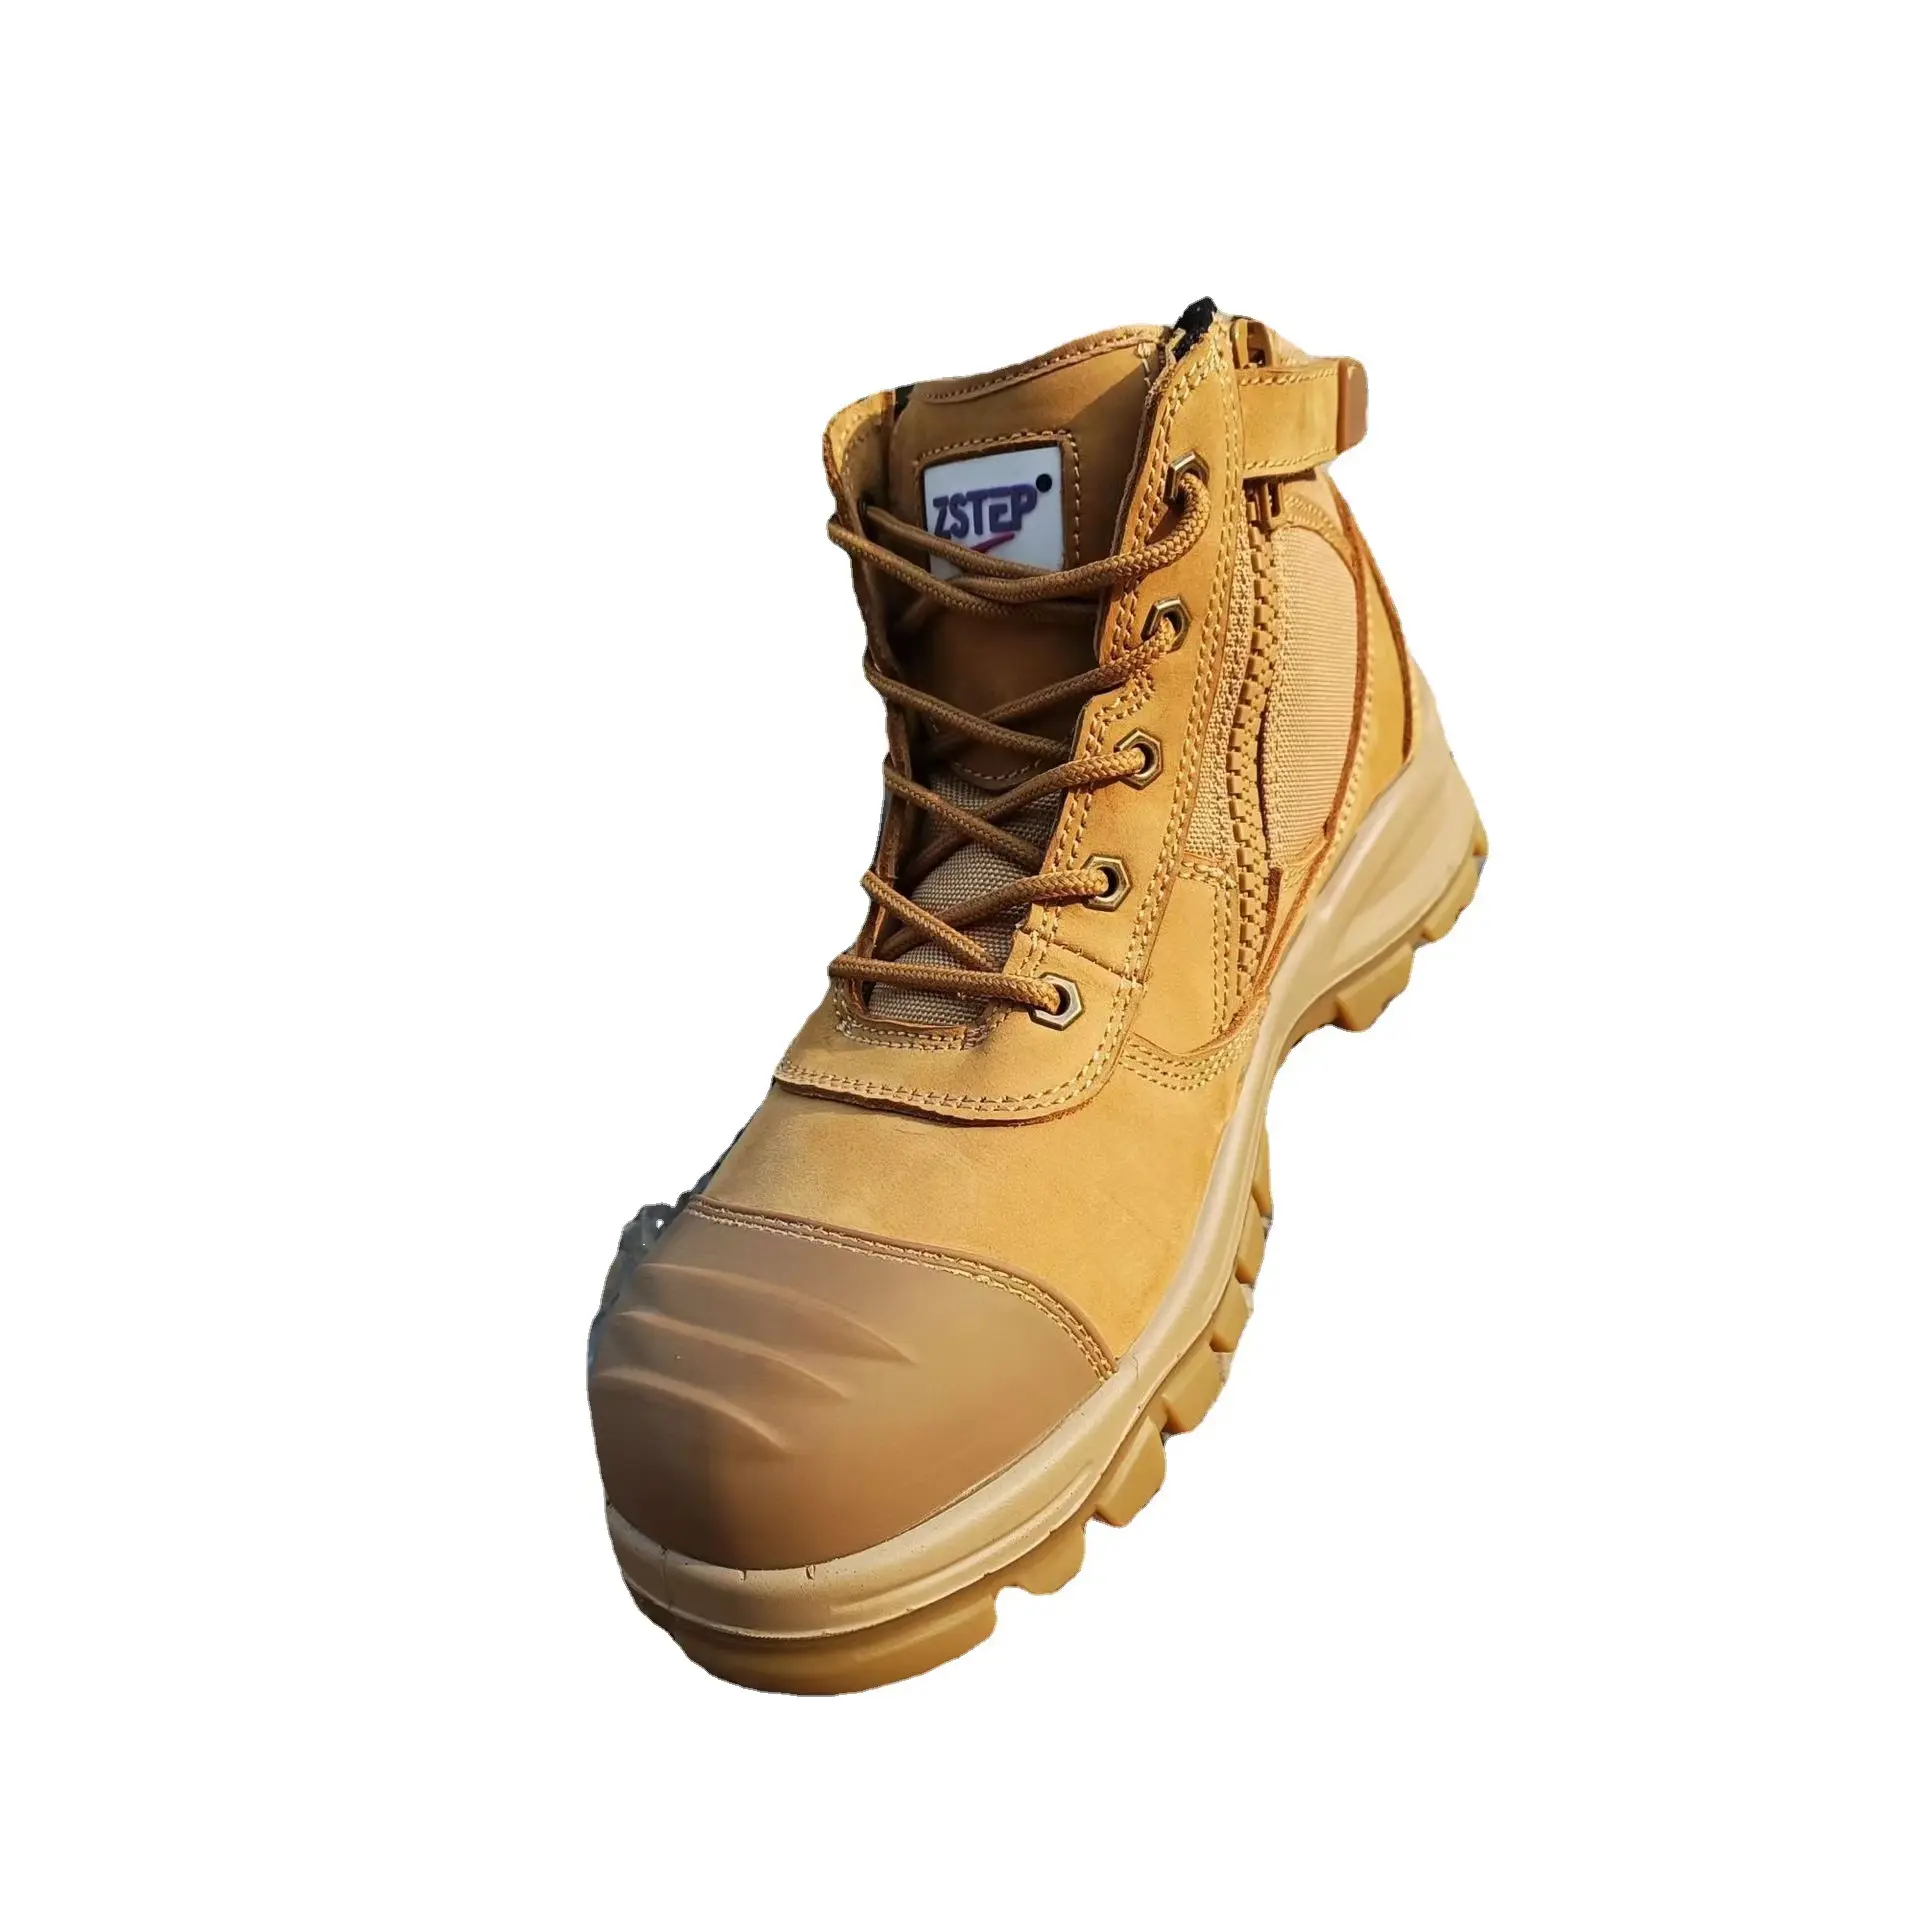 Anti-Crash Anti-Puncture Anti-Static, Anti-Ski, Anti-Oil Steel Toe Man Safety Boot Shoes Protective Work Boots For Mining